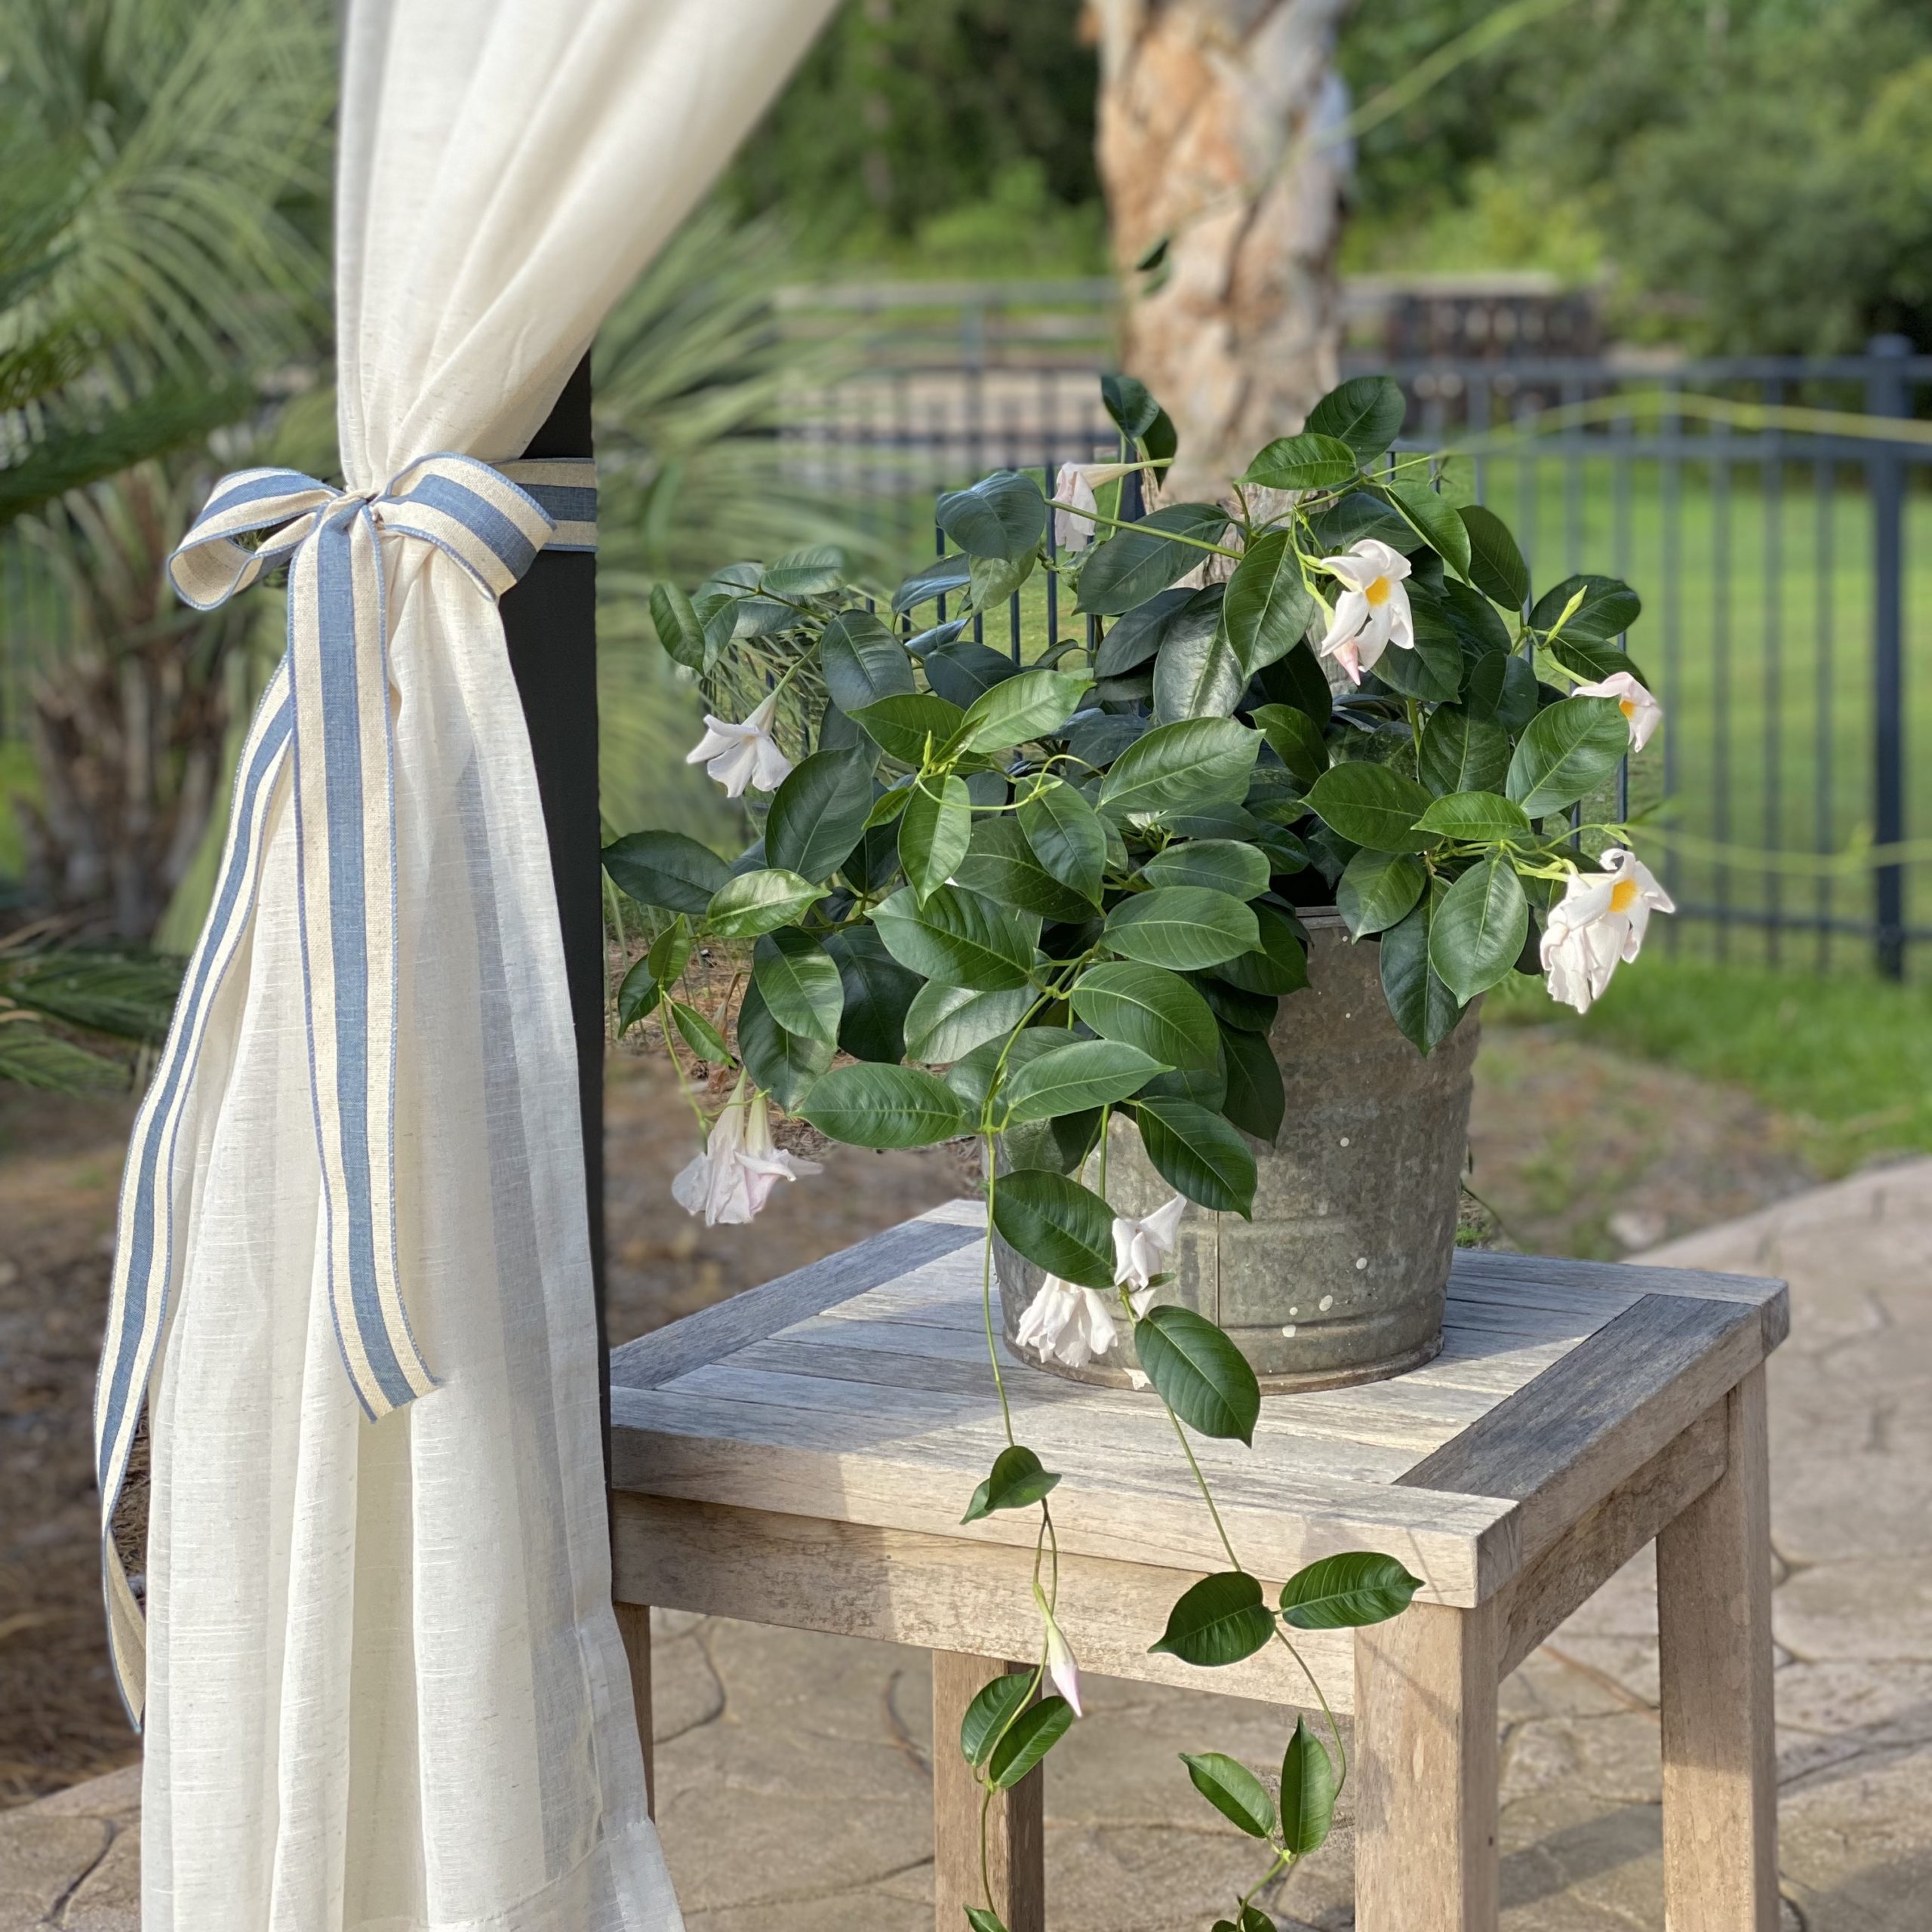 Outdoor curtain tied back with blue and white ribbon next to a table with a plant on it.